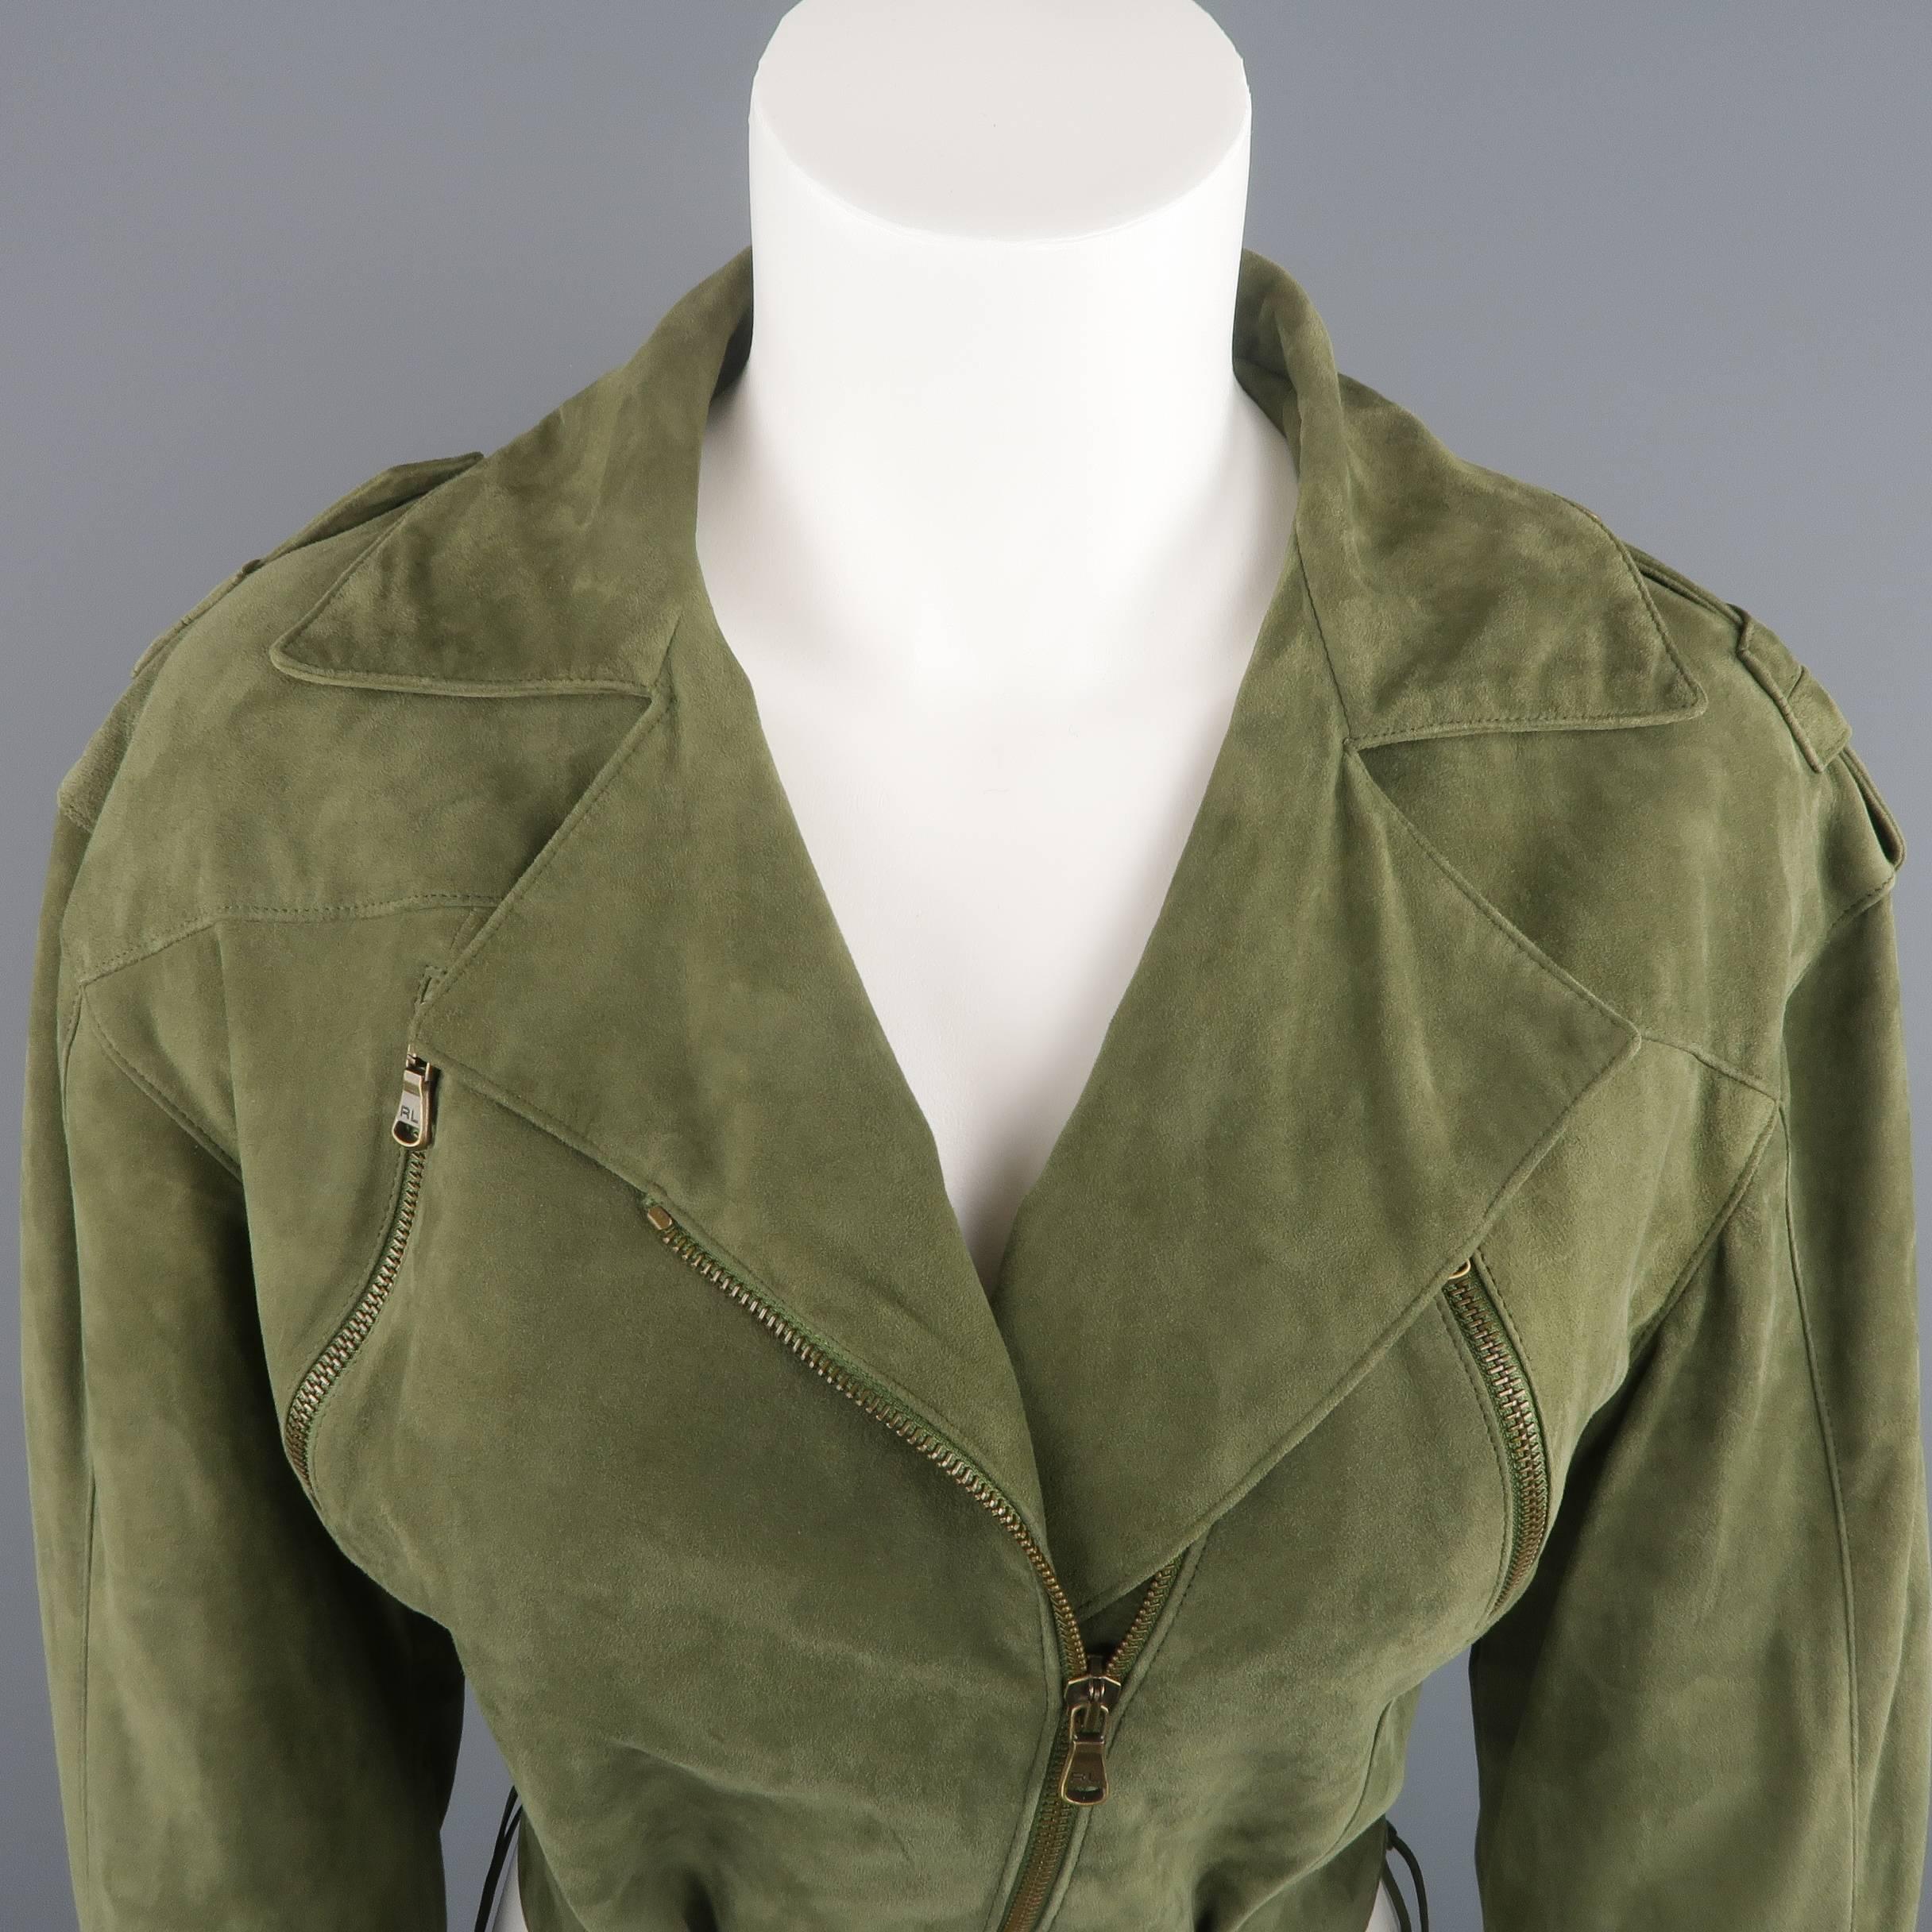 RALPH LAUREN BLACK LABEL cropped biker jacket comes in a light weight, soft, olive green suede and features a pointed collar lapel, gold tone asymmetrical zip front, epaulets, slanted zip pockets, lace up sides with grommets, frontal belted waist,